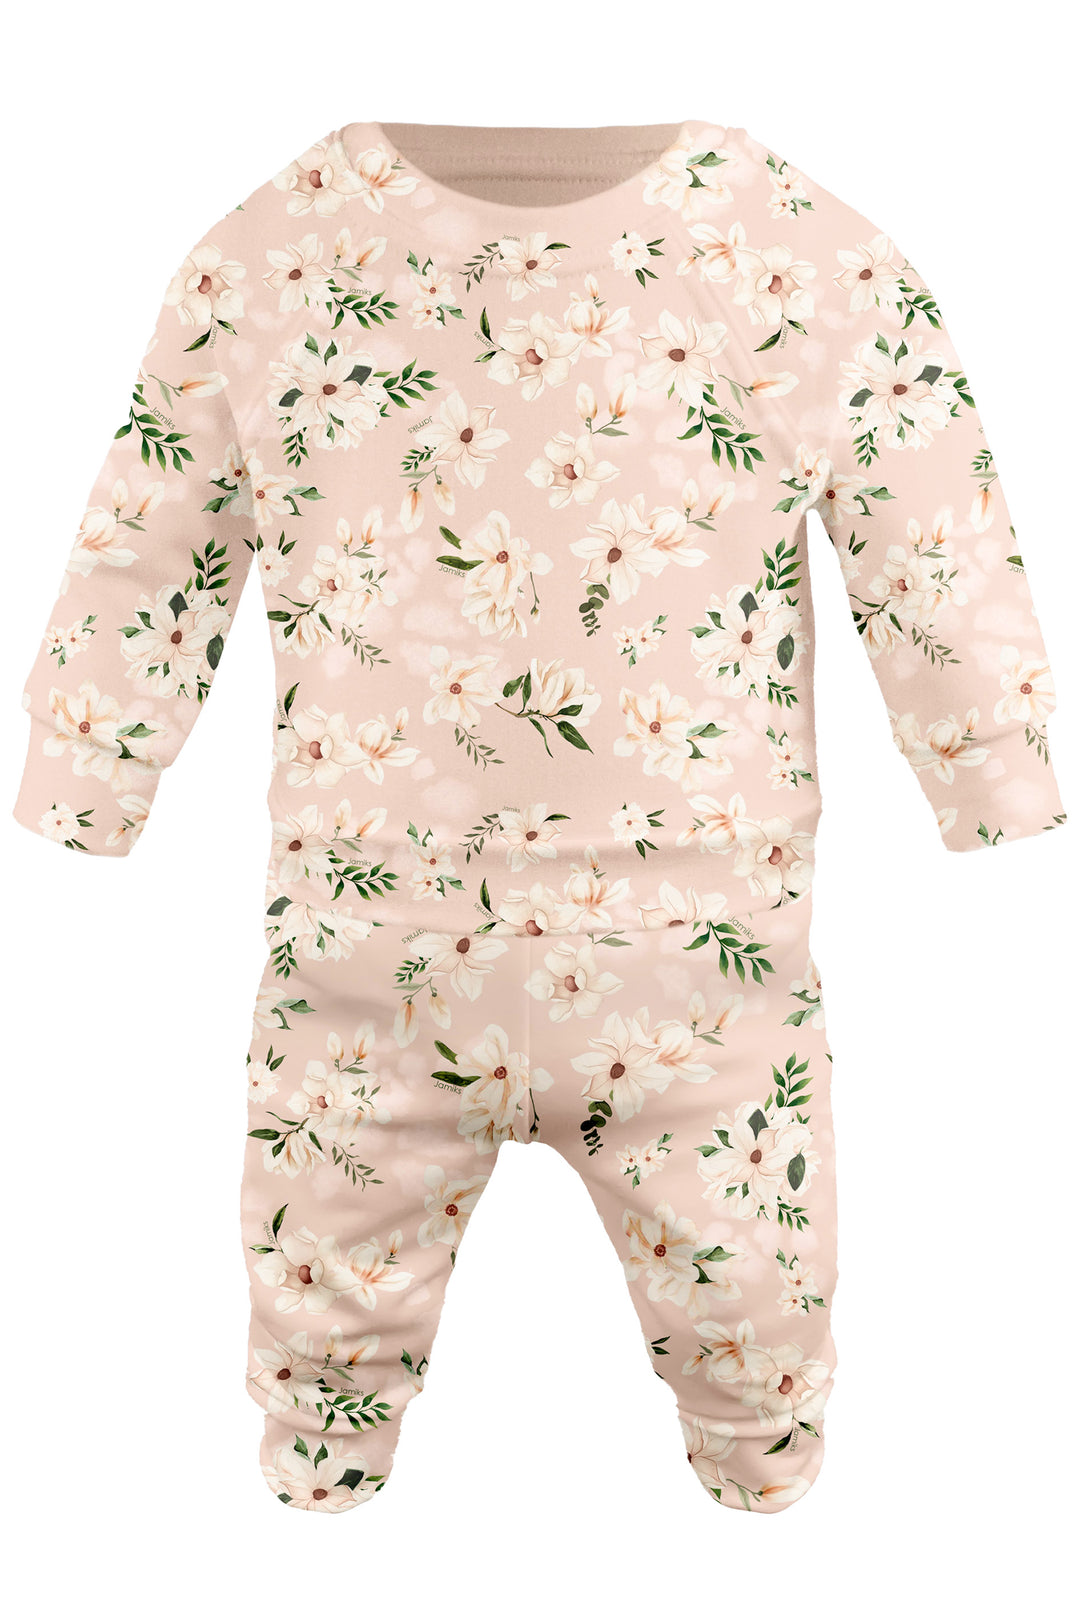 Jamiks "Joni" Pale Pink Floral Bamboo Top & Trousers | Millie and John